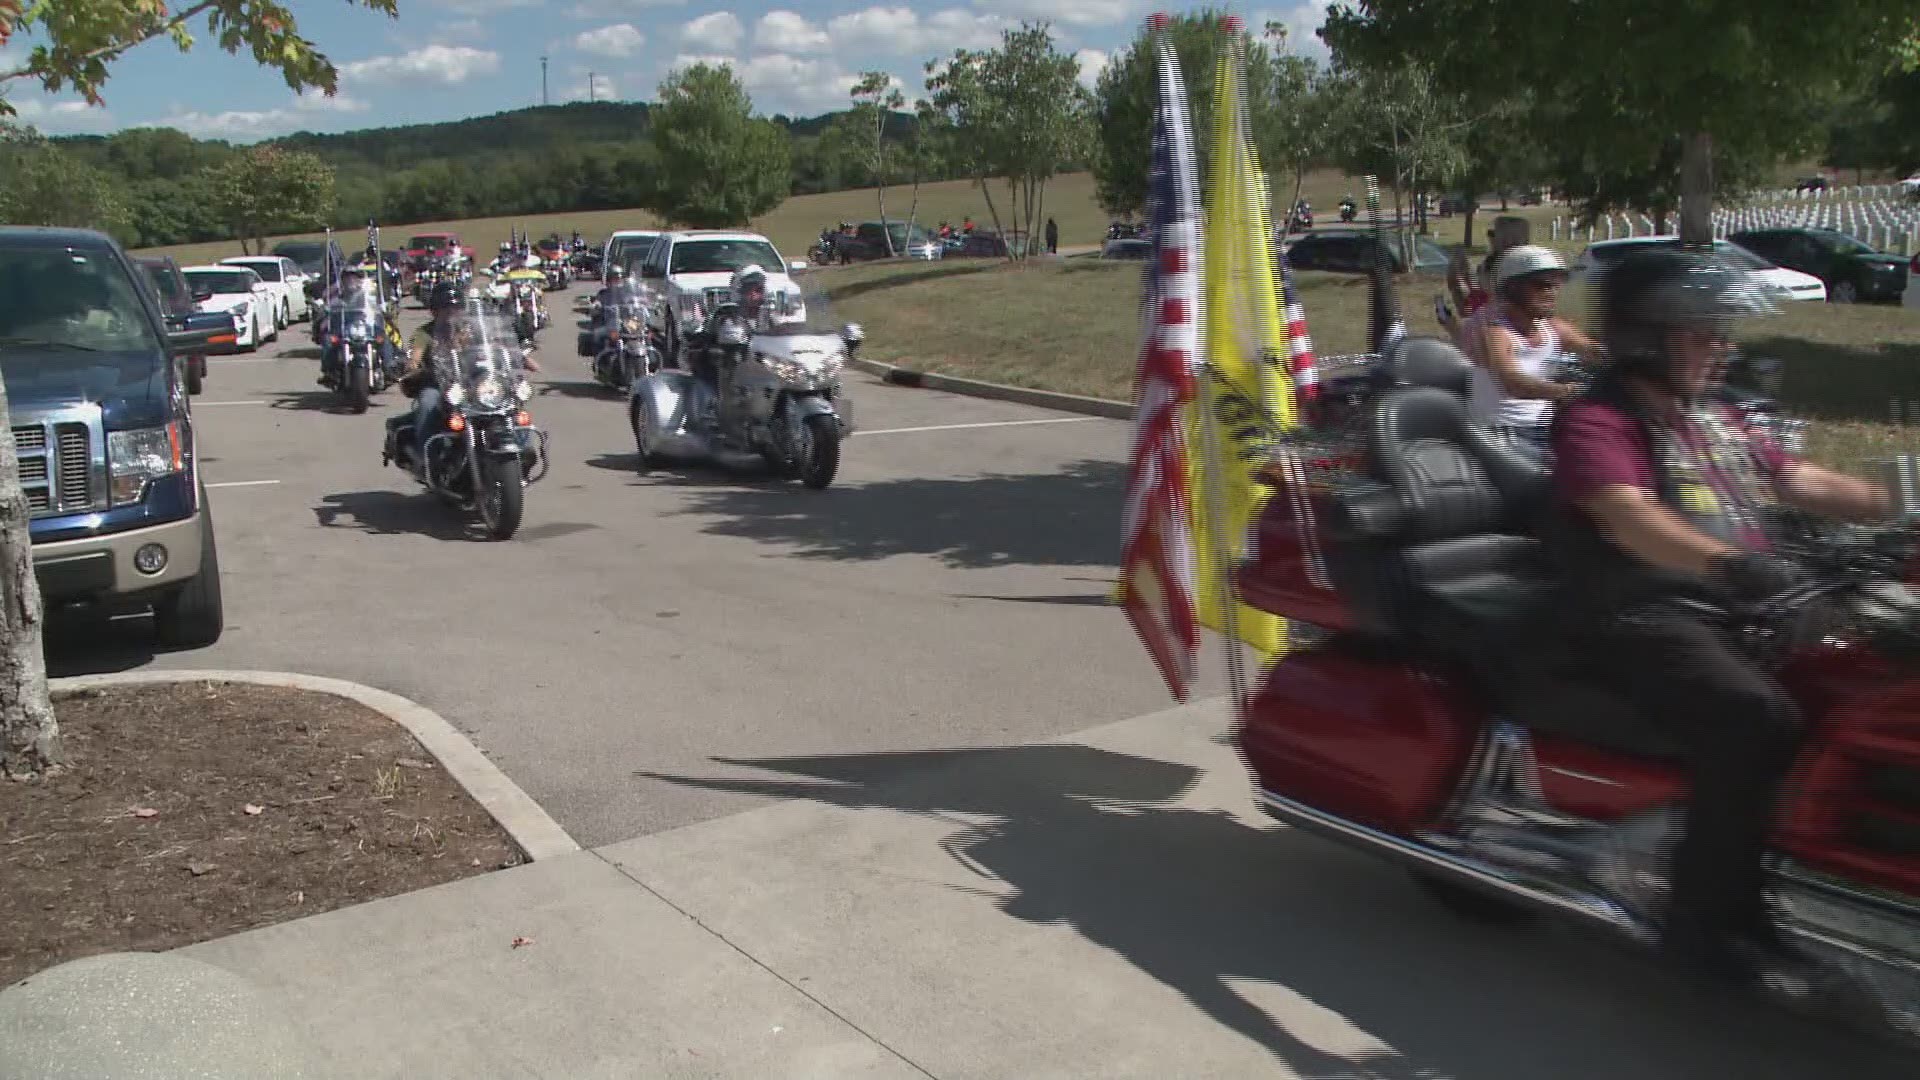 The volunteer group riding escort at funerals for veterans in East Tennessee have a rich tradition of serving those who have served this country.